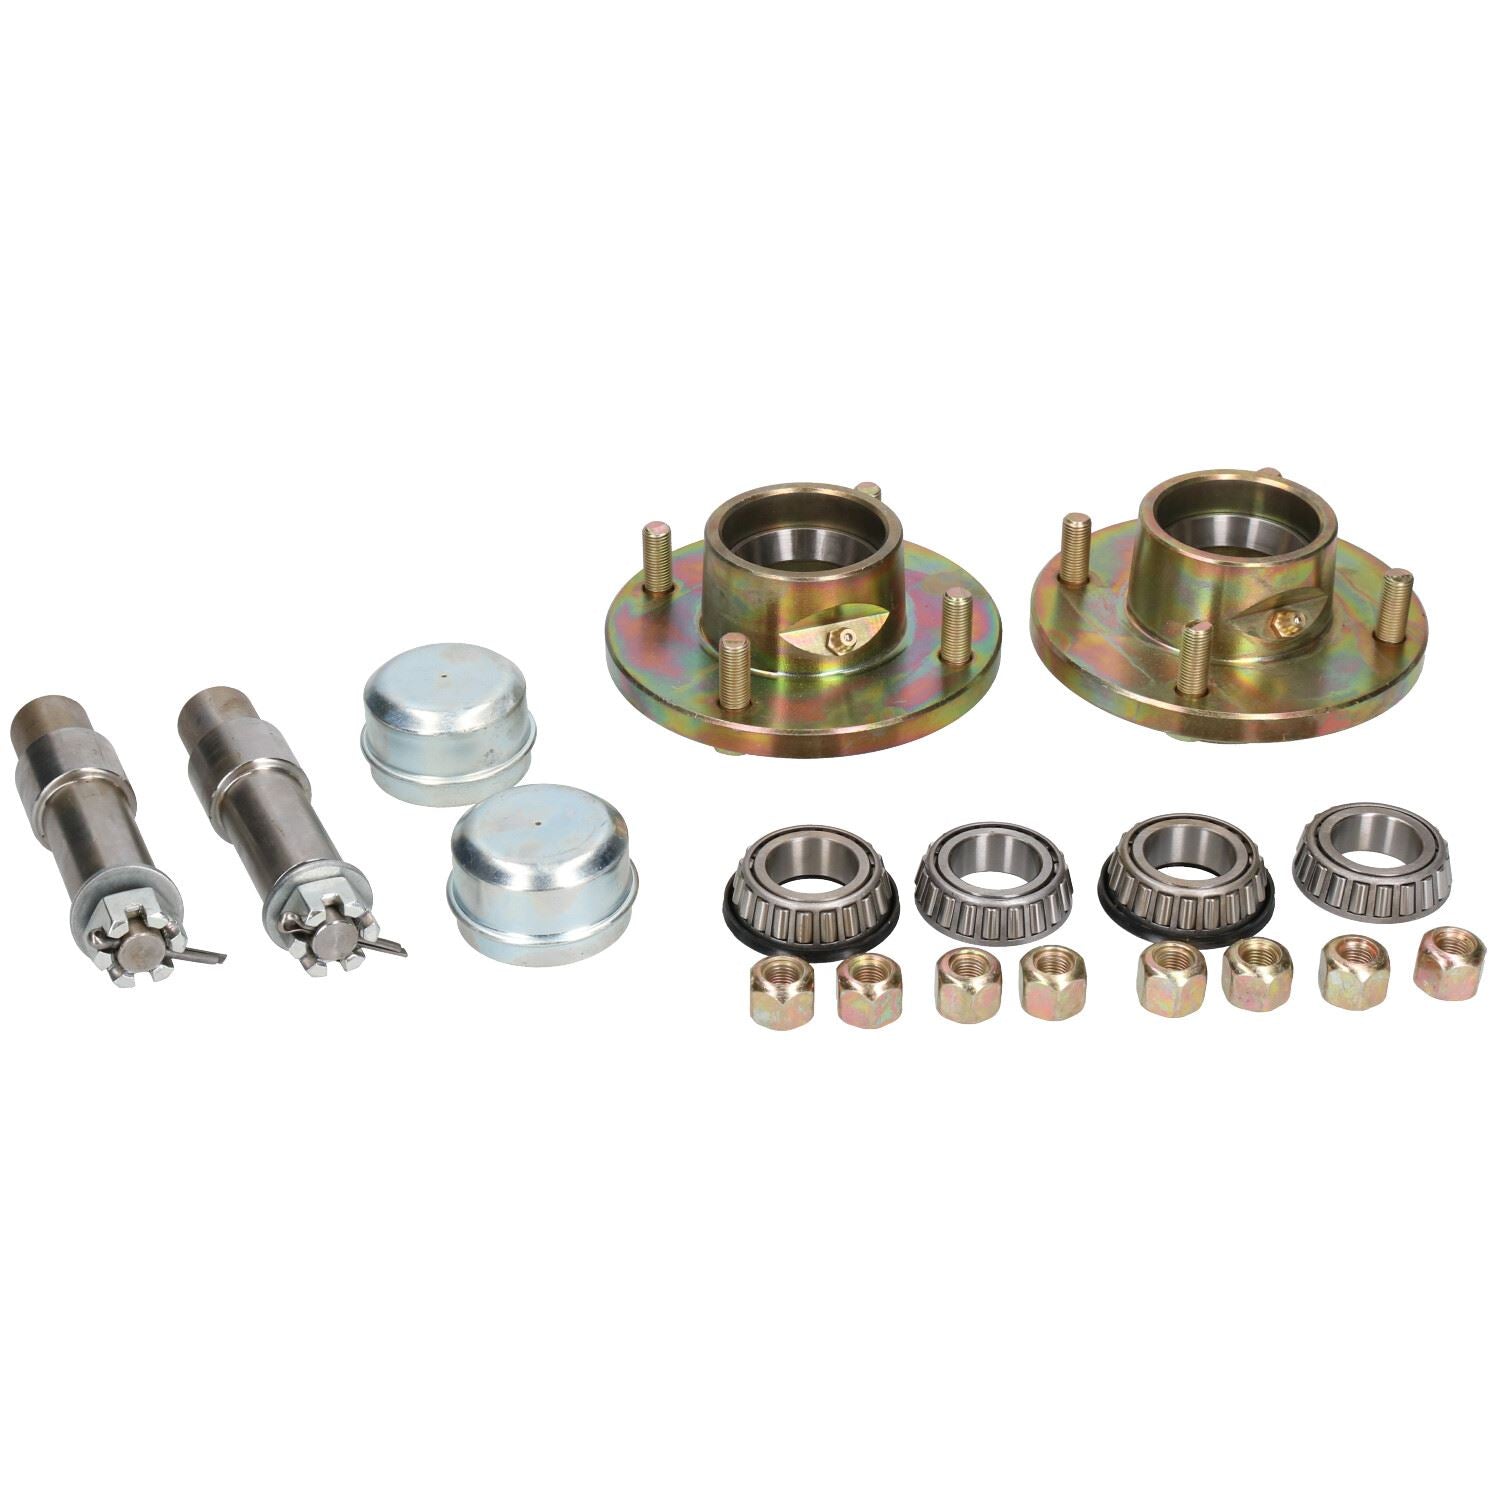 2 PACK Trailer Trolley Wheel Hubs & Stub Axles 4" PCD With Nuts & Caps 750kg